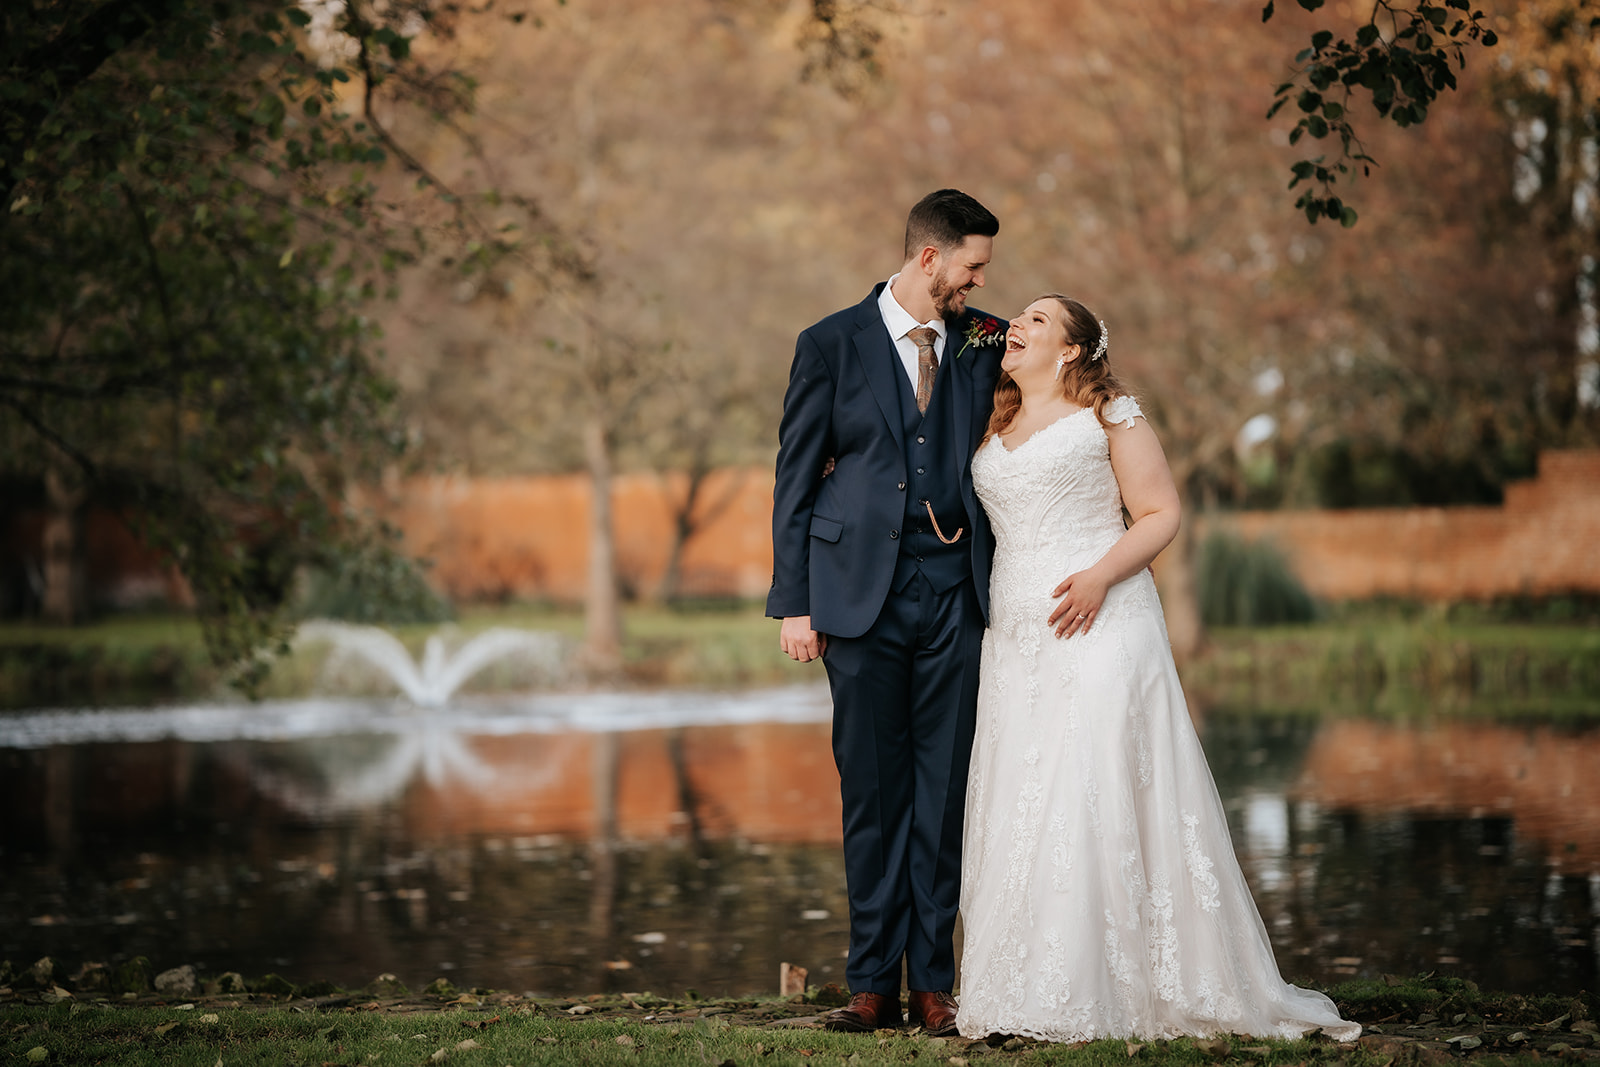 Wedding couple by the lake at Leez Priory wedding venue in Essex